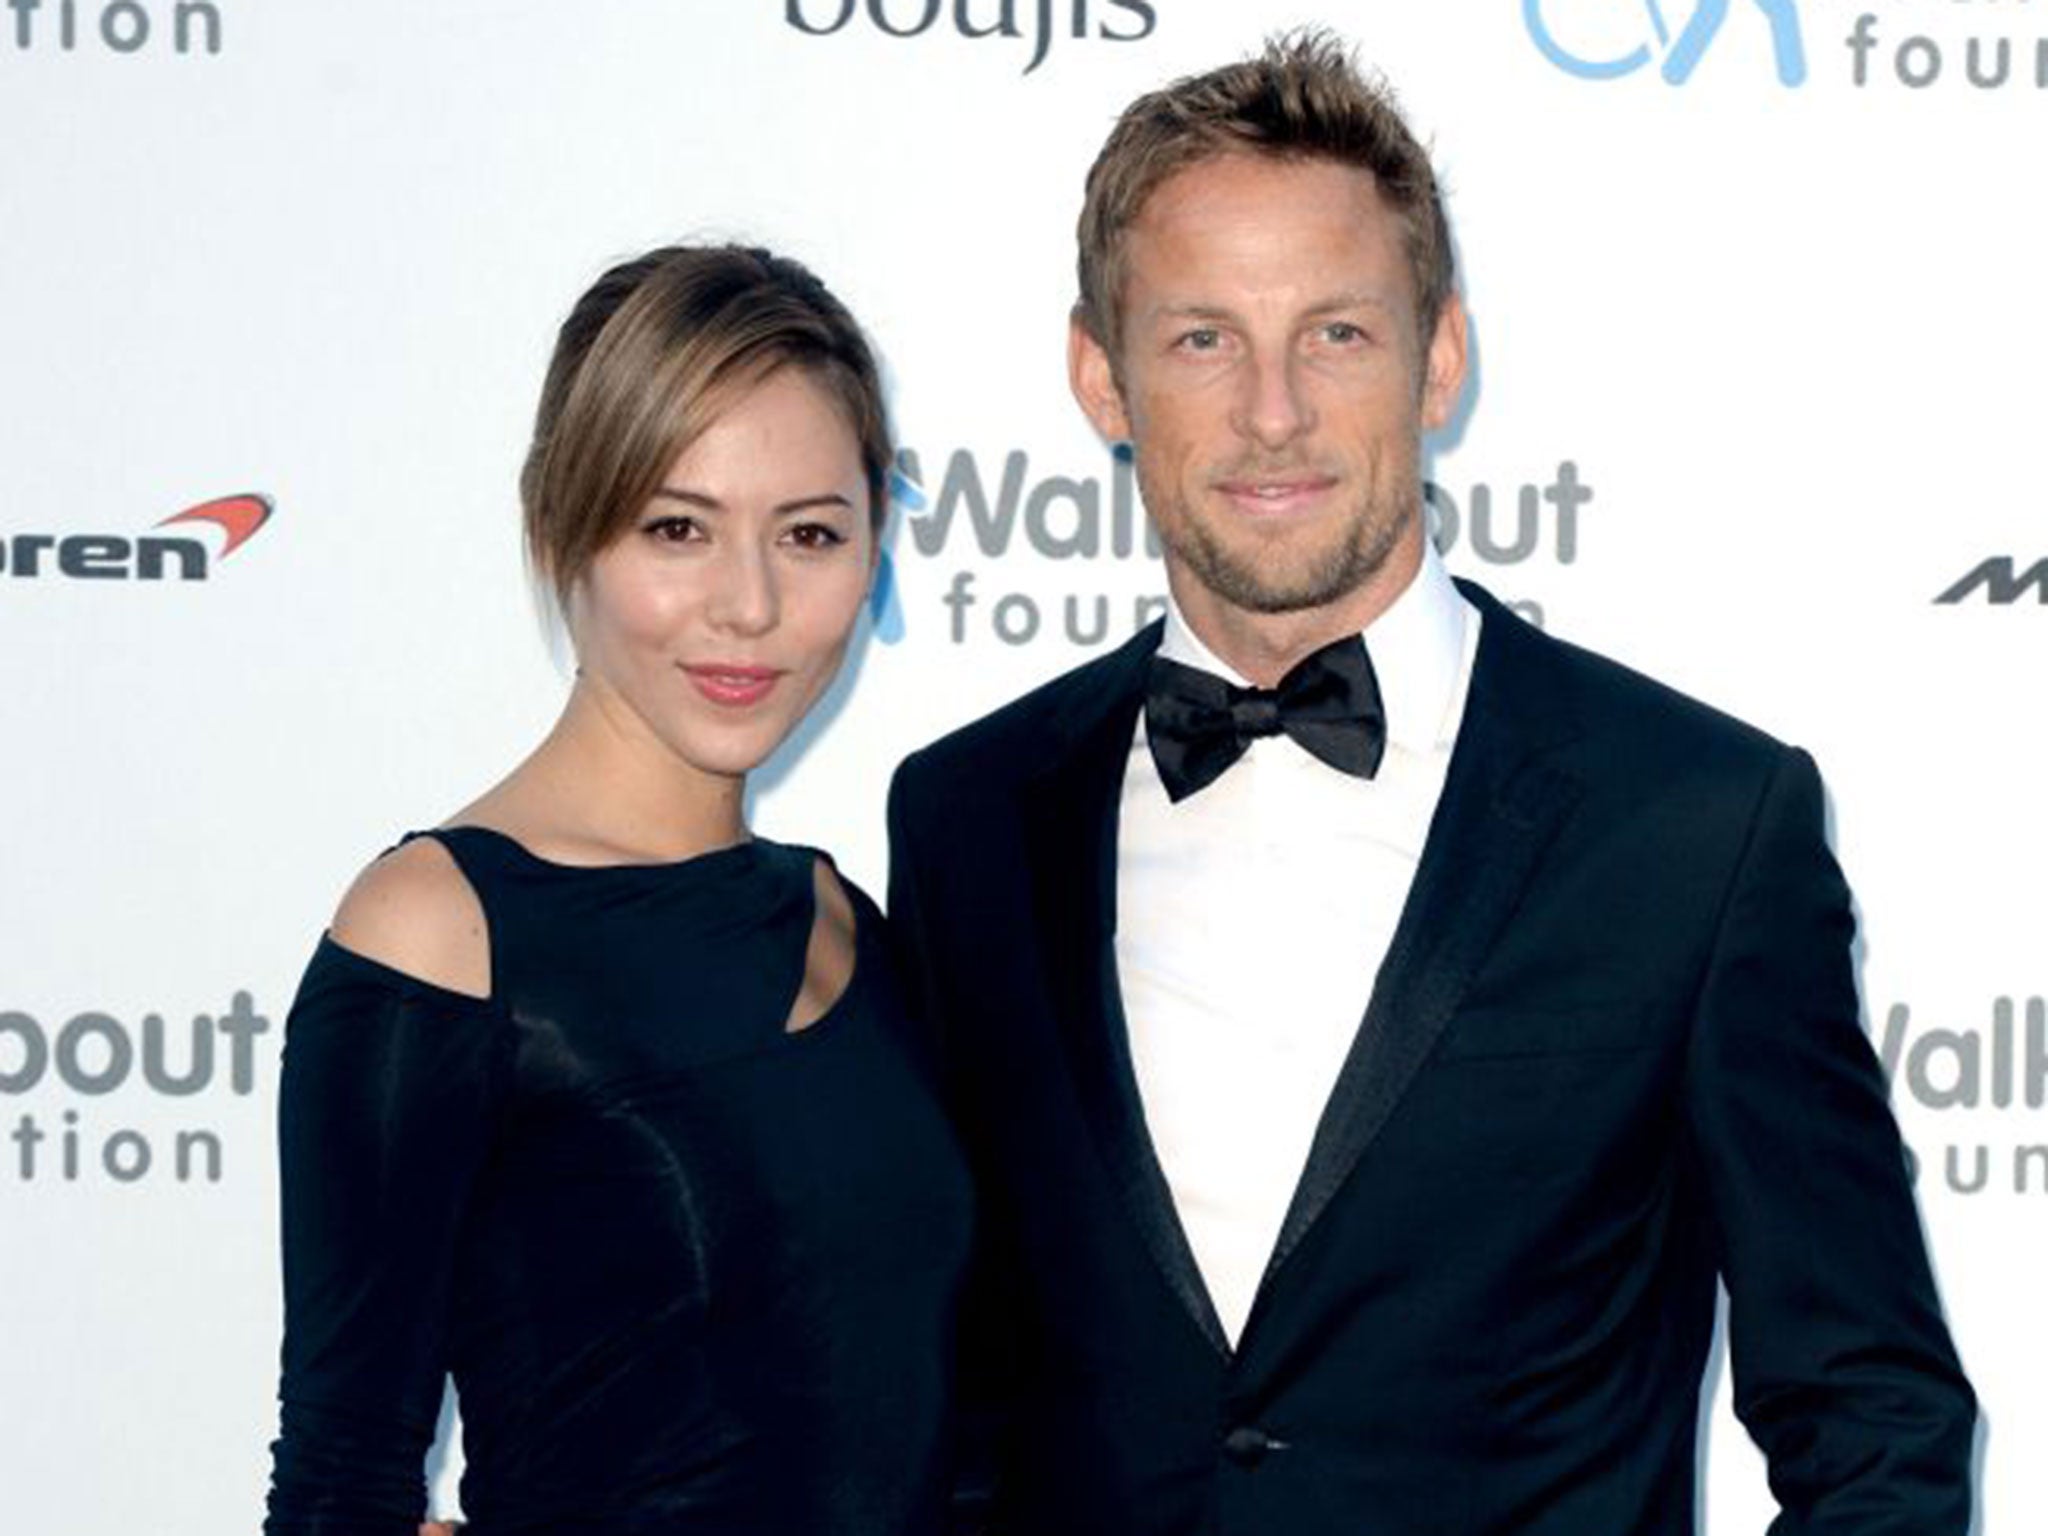 Jenson Button and his wife Jessica who have been burgled on holiday and "most upsettingly" the thieves made off with her engagement ring.